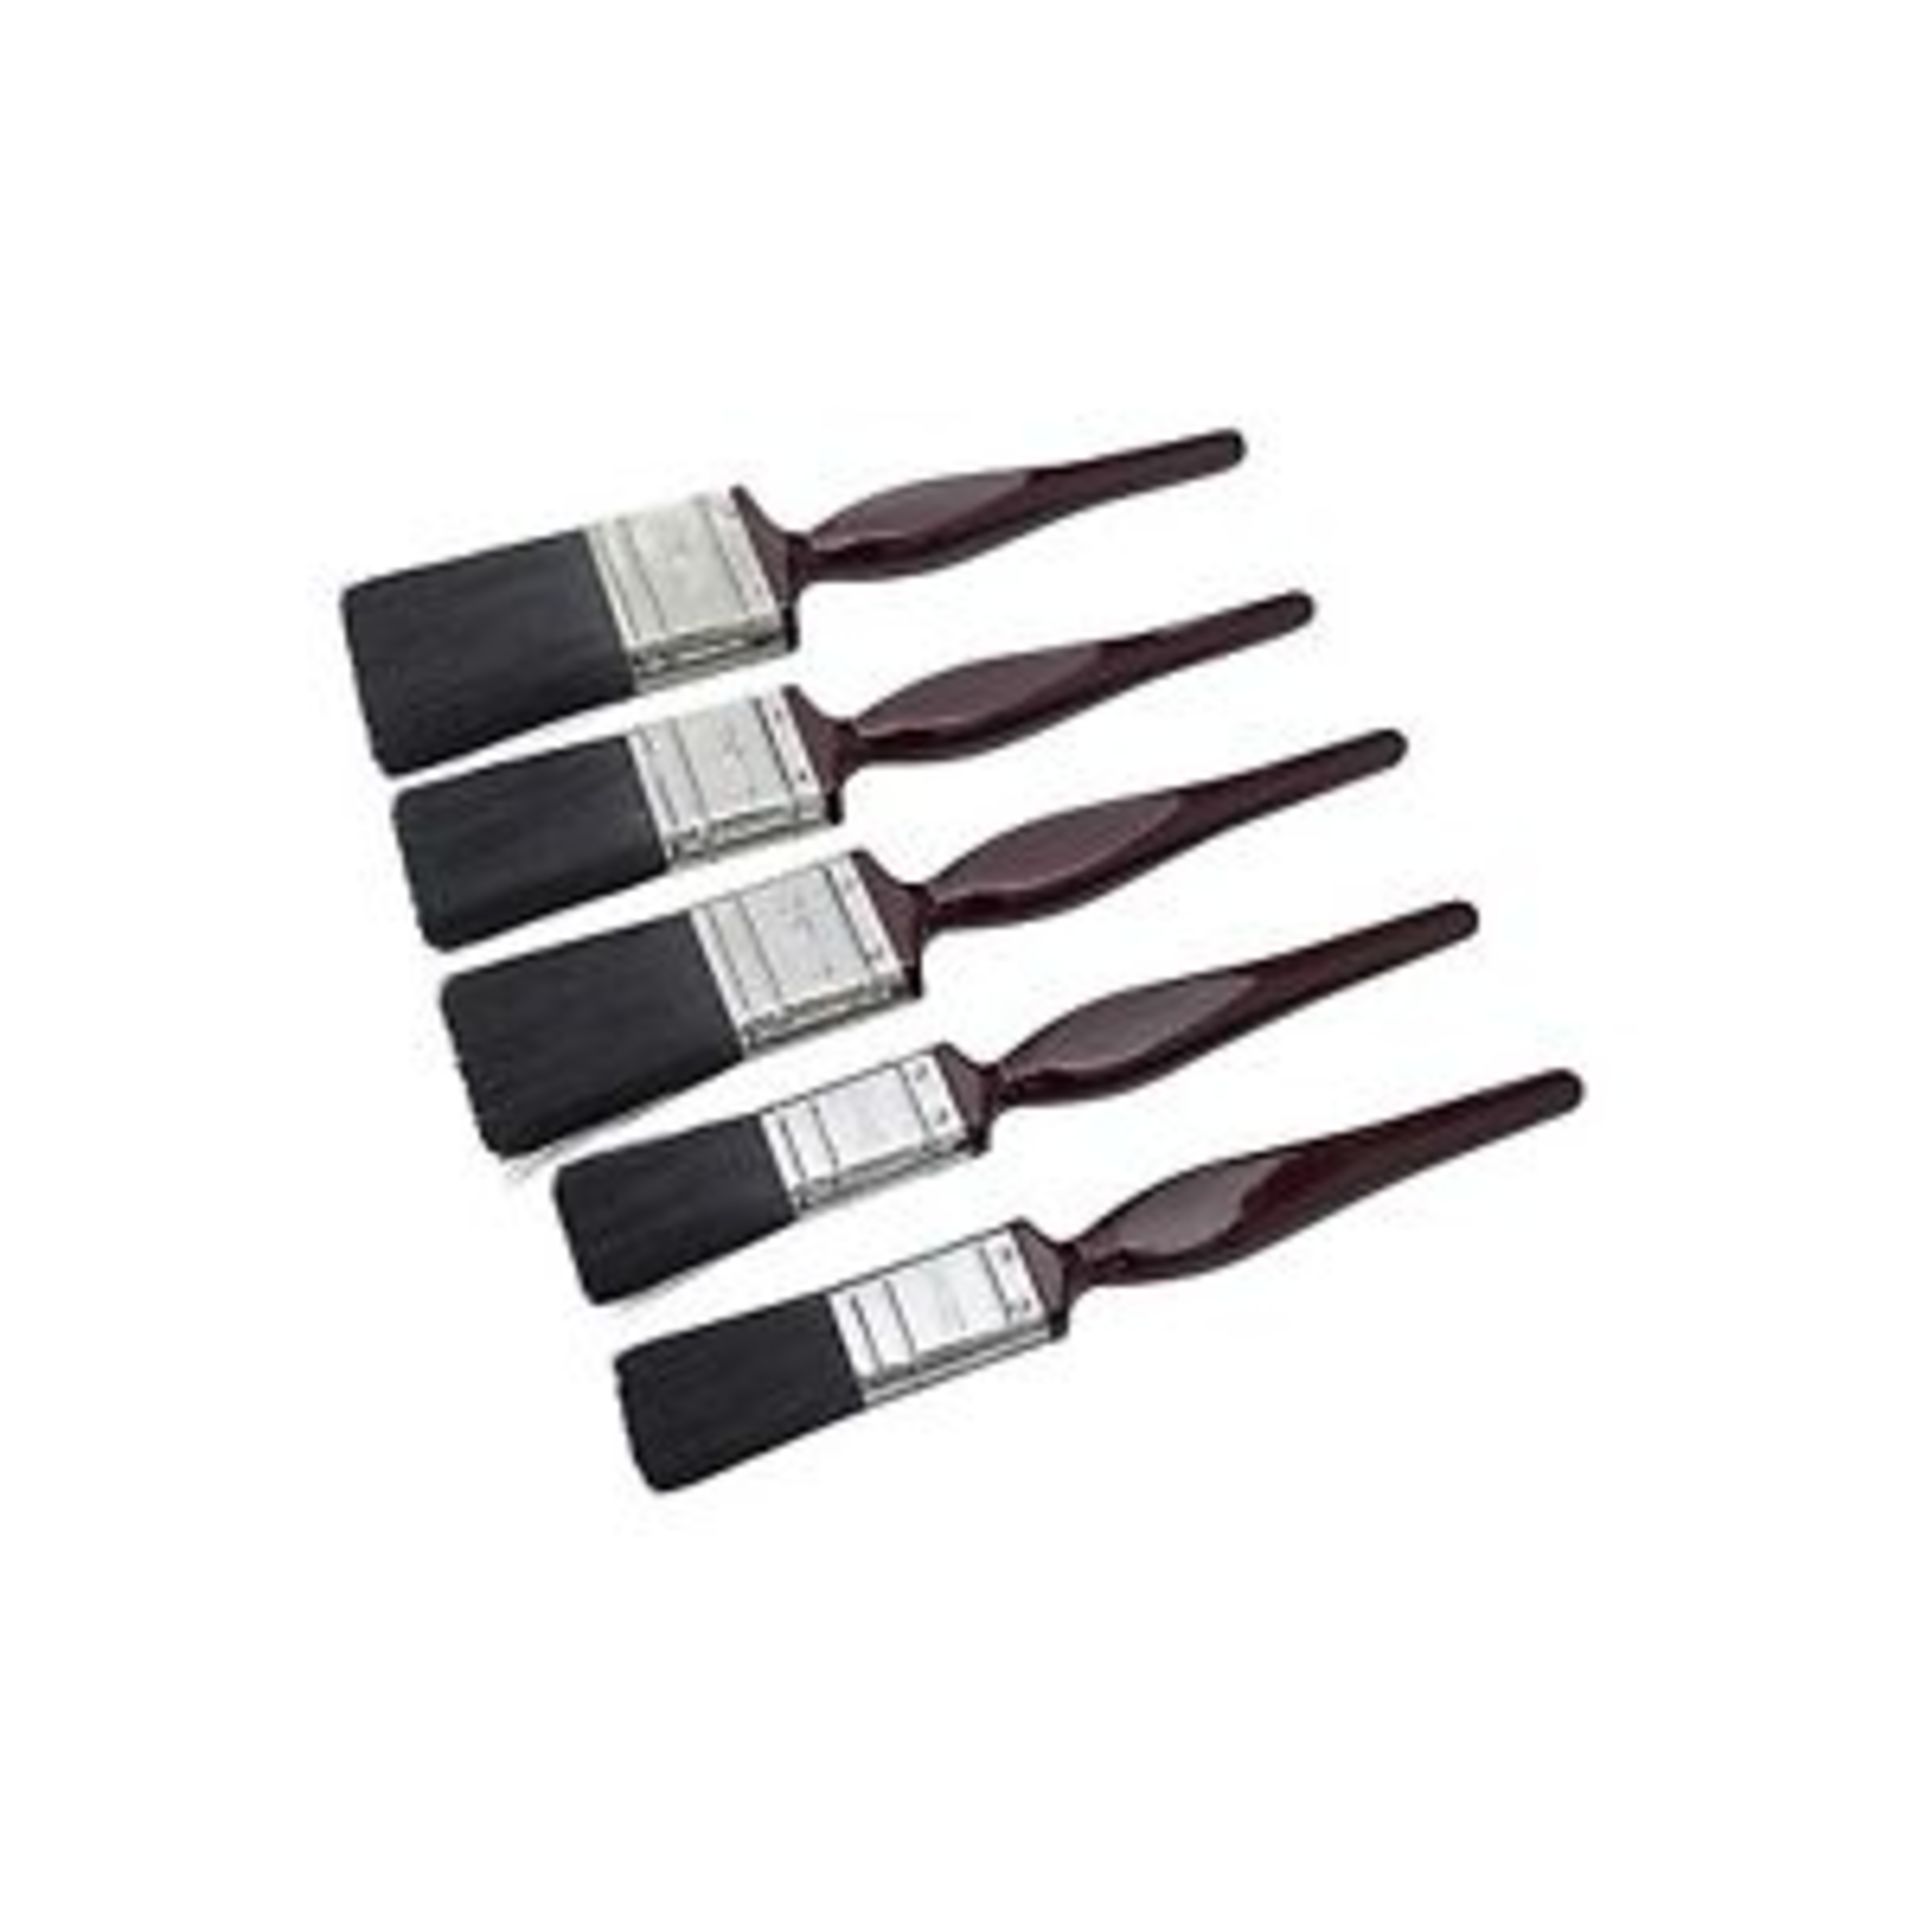 V *TRADE QTY* Brand New High Quality 5 Piece Synthetic No Loss Paint Brush Set Includes 2 x 25 mm, 2